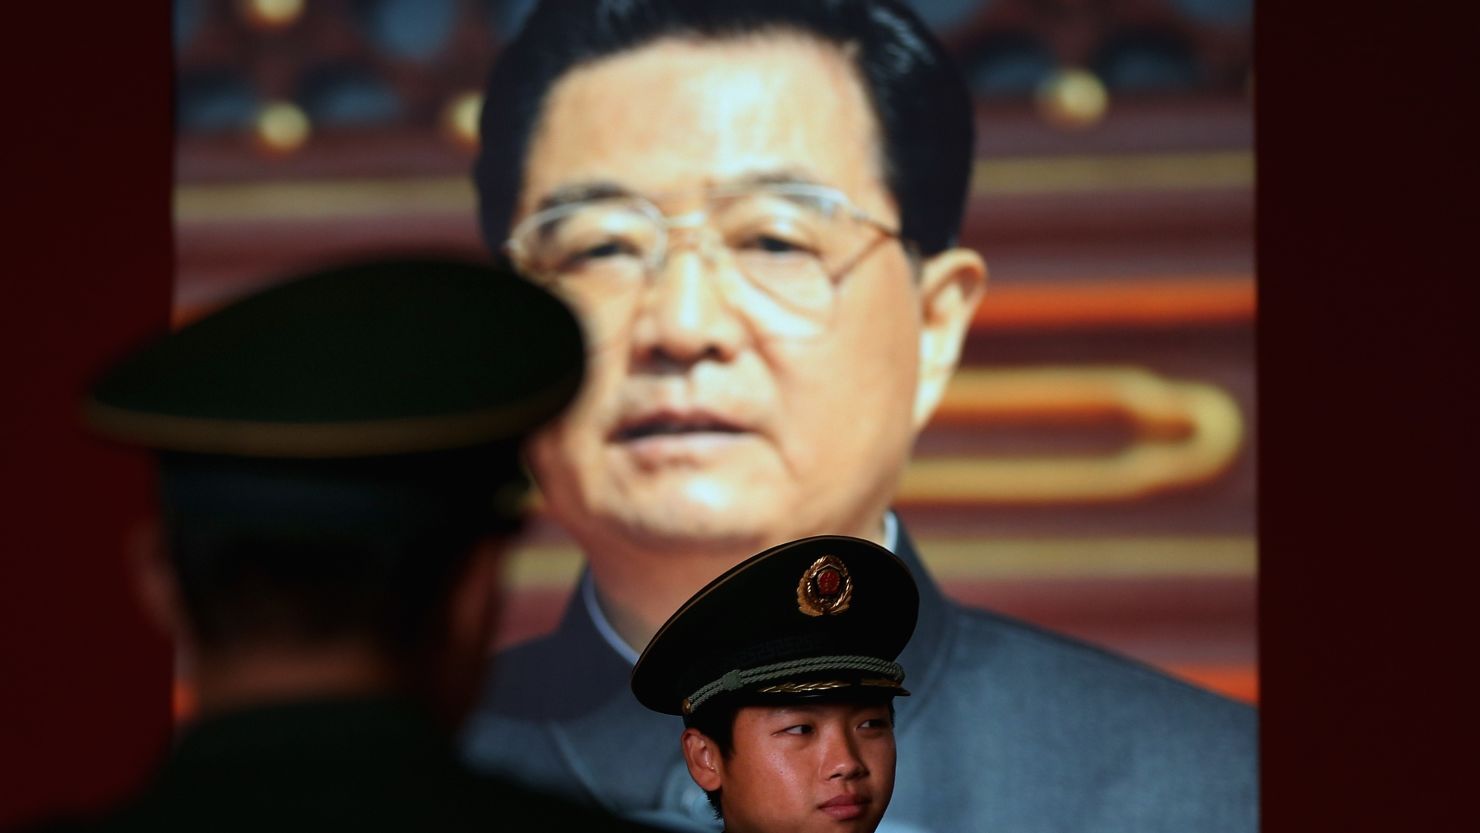  A paramilitary policeman passes by the portrait of China's President Hu Jintao at a state-sponsored exhibition in Beijing Tuesday.